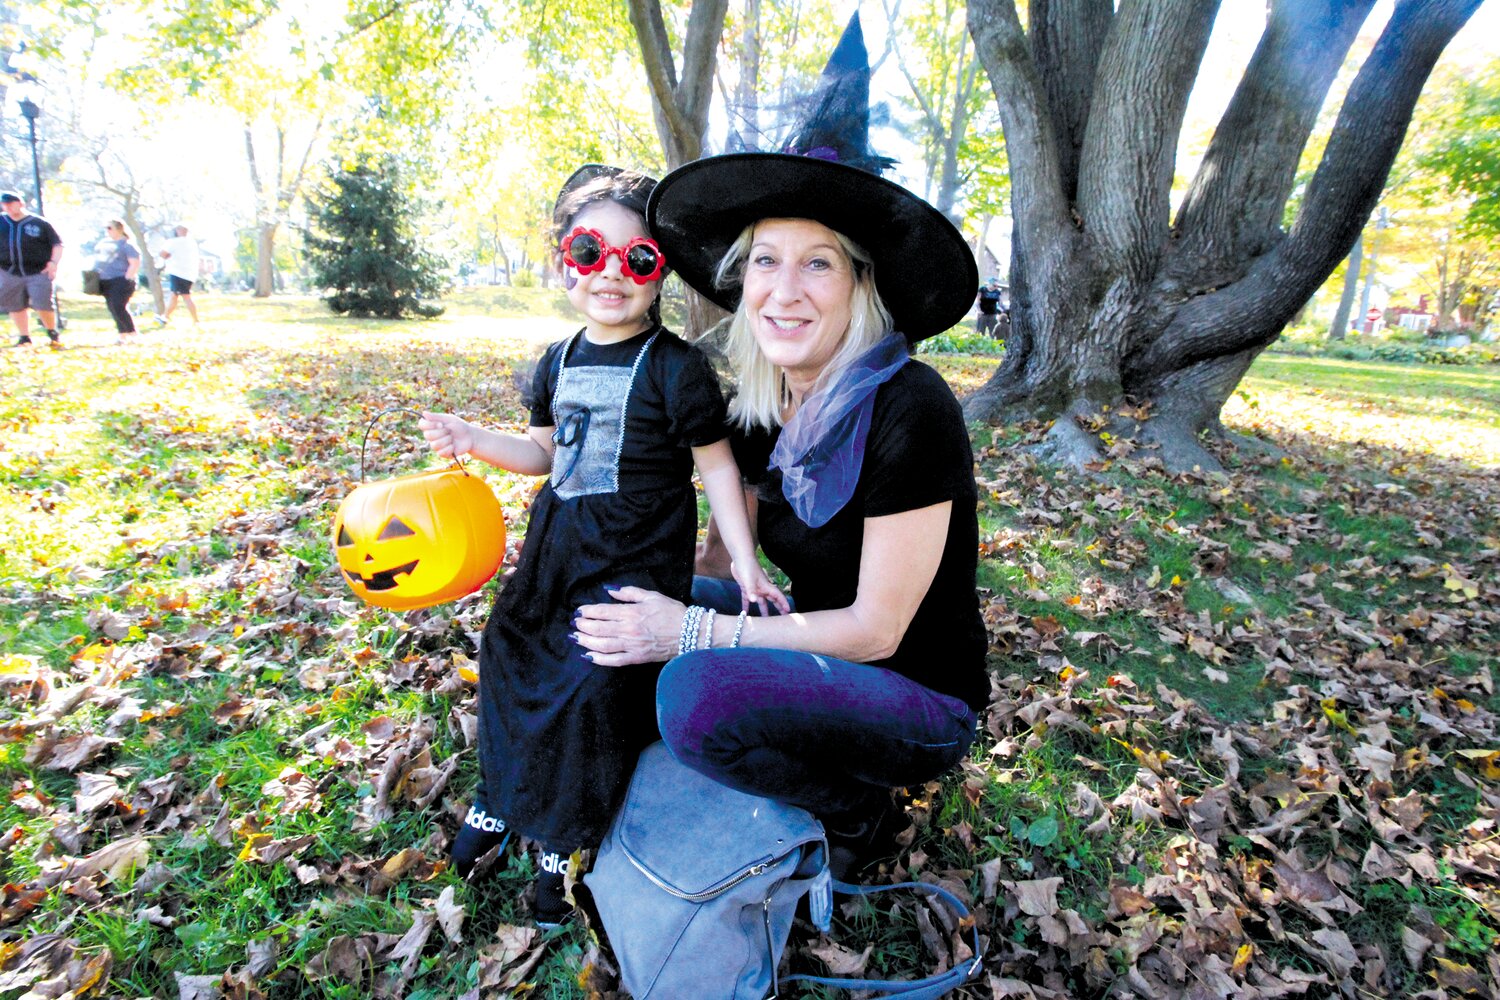 A WITCH'S DELIGHT: Rose Wojtanowski and her granddaughter Catalia Rodrigues find a leafy spot as they wait the start of the Pawtuxet Village parade